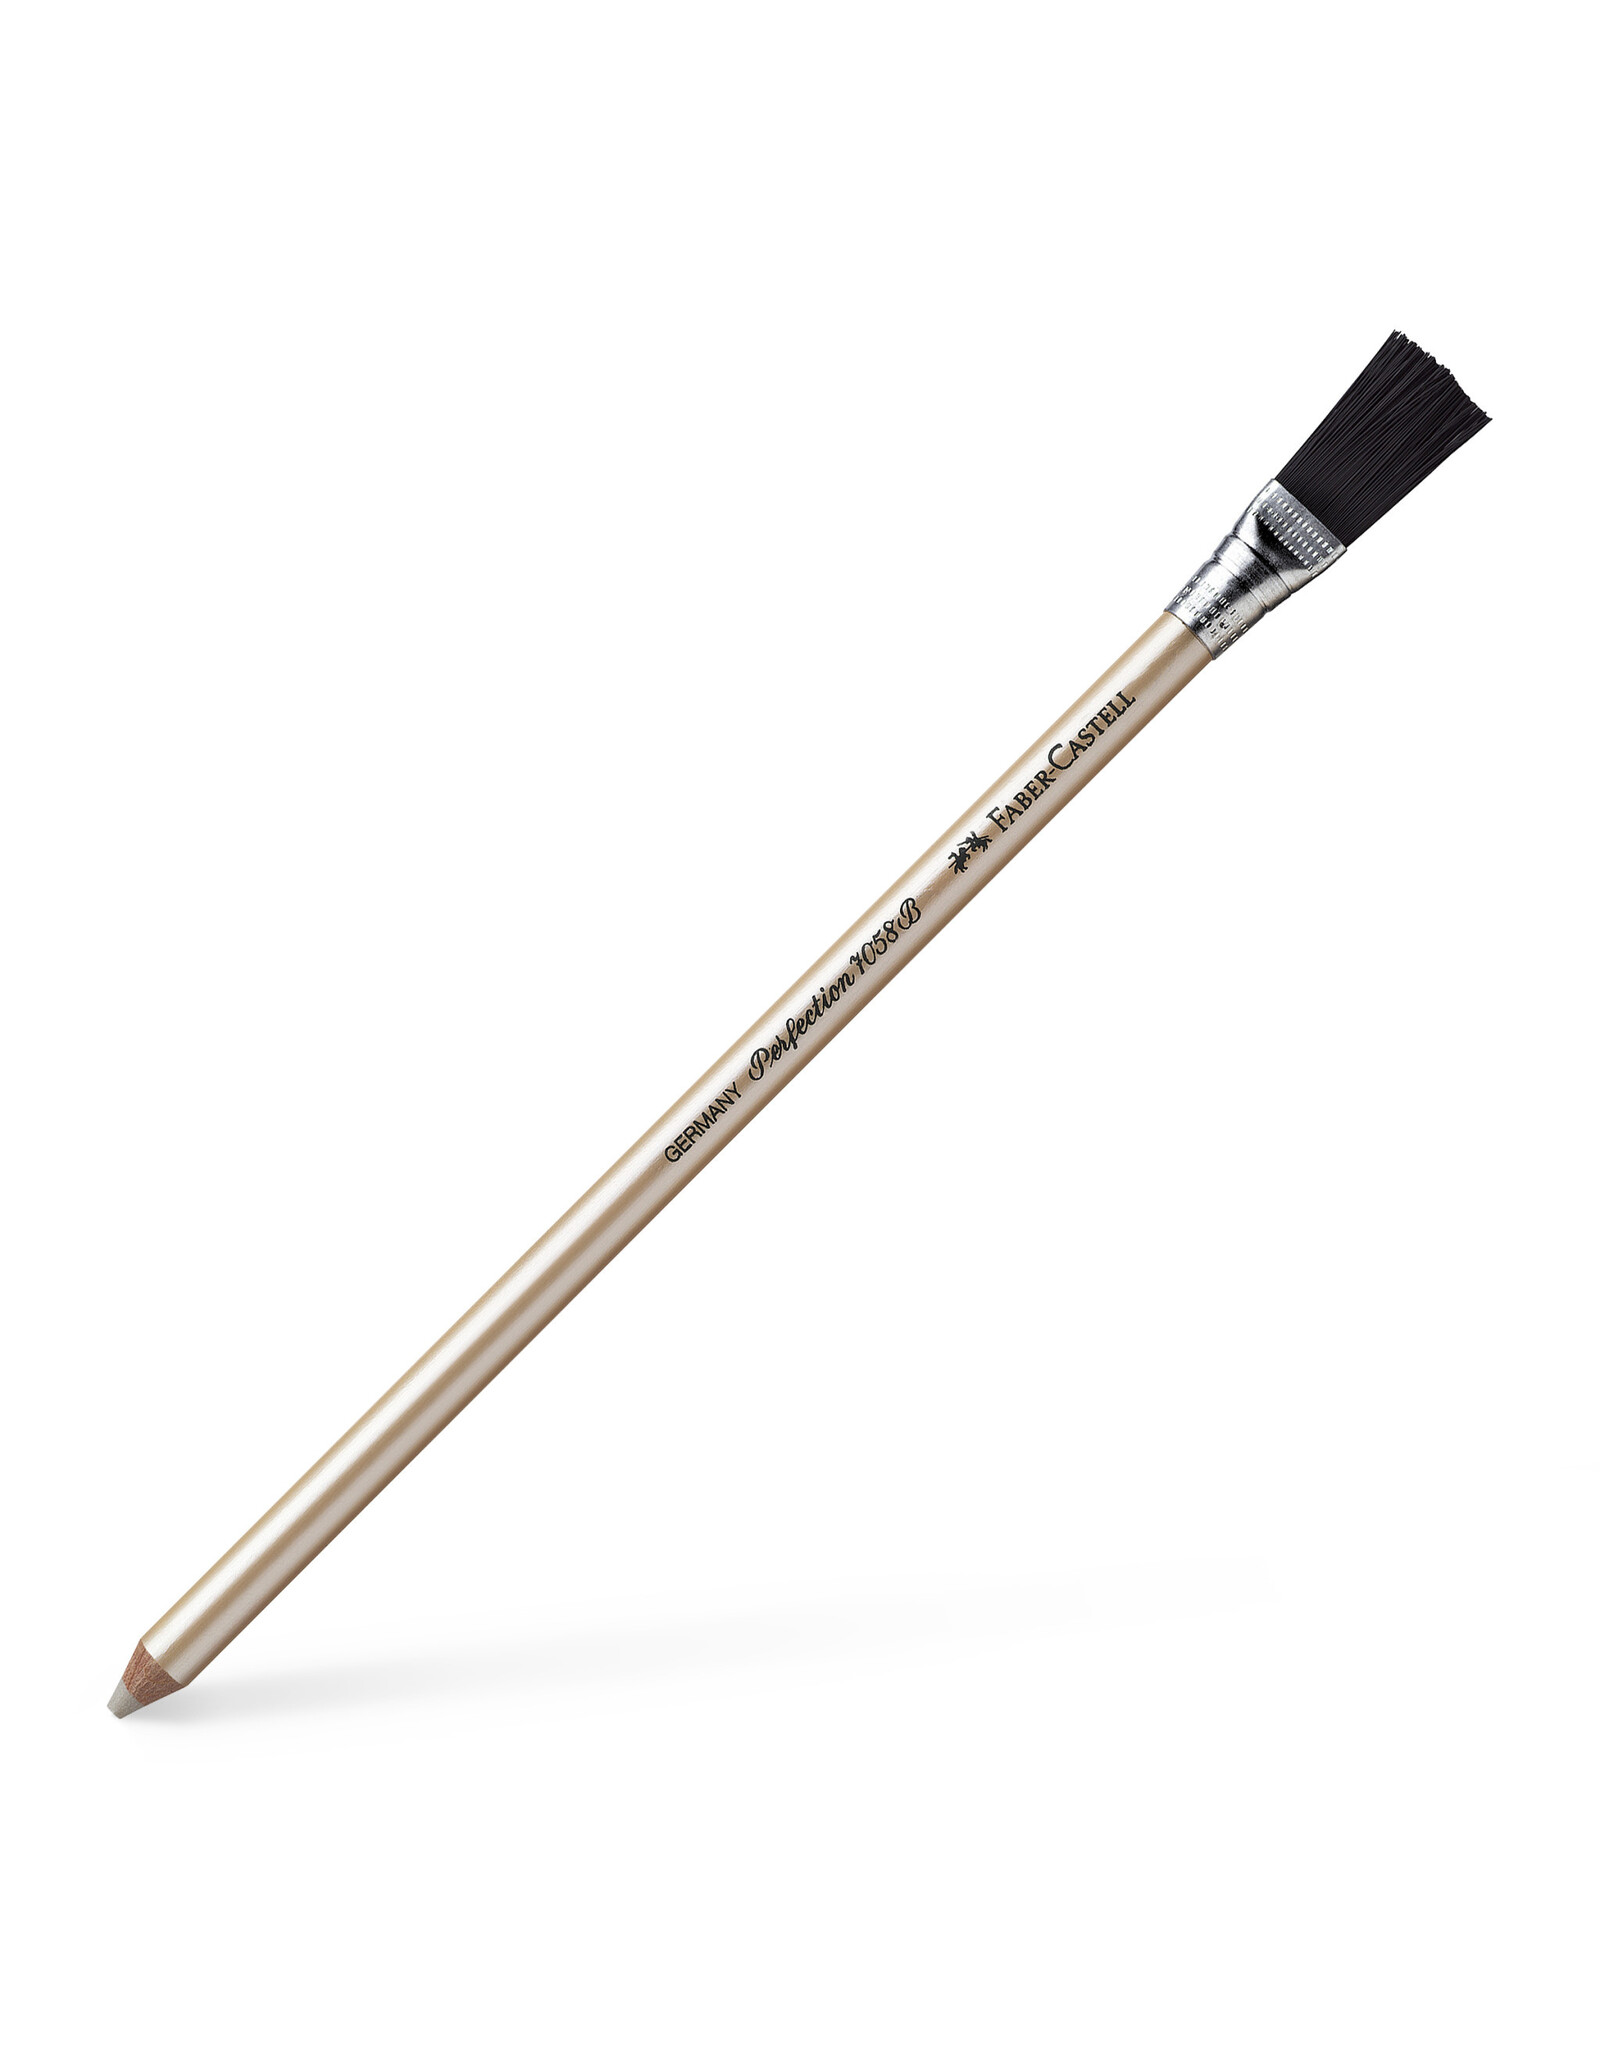 FABER-CASTELL Faber-Castell Perfection Eraser Pencil with Brush